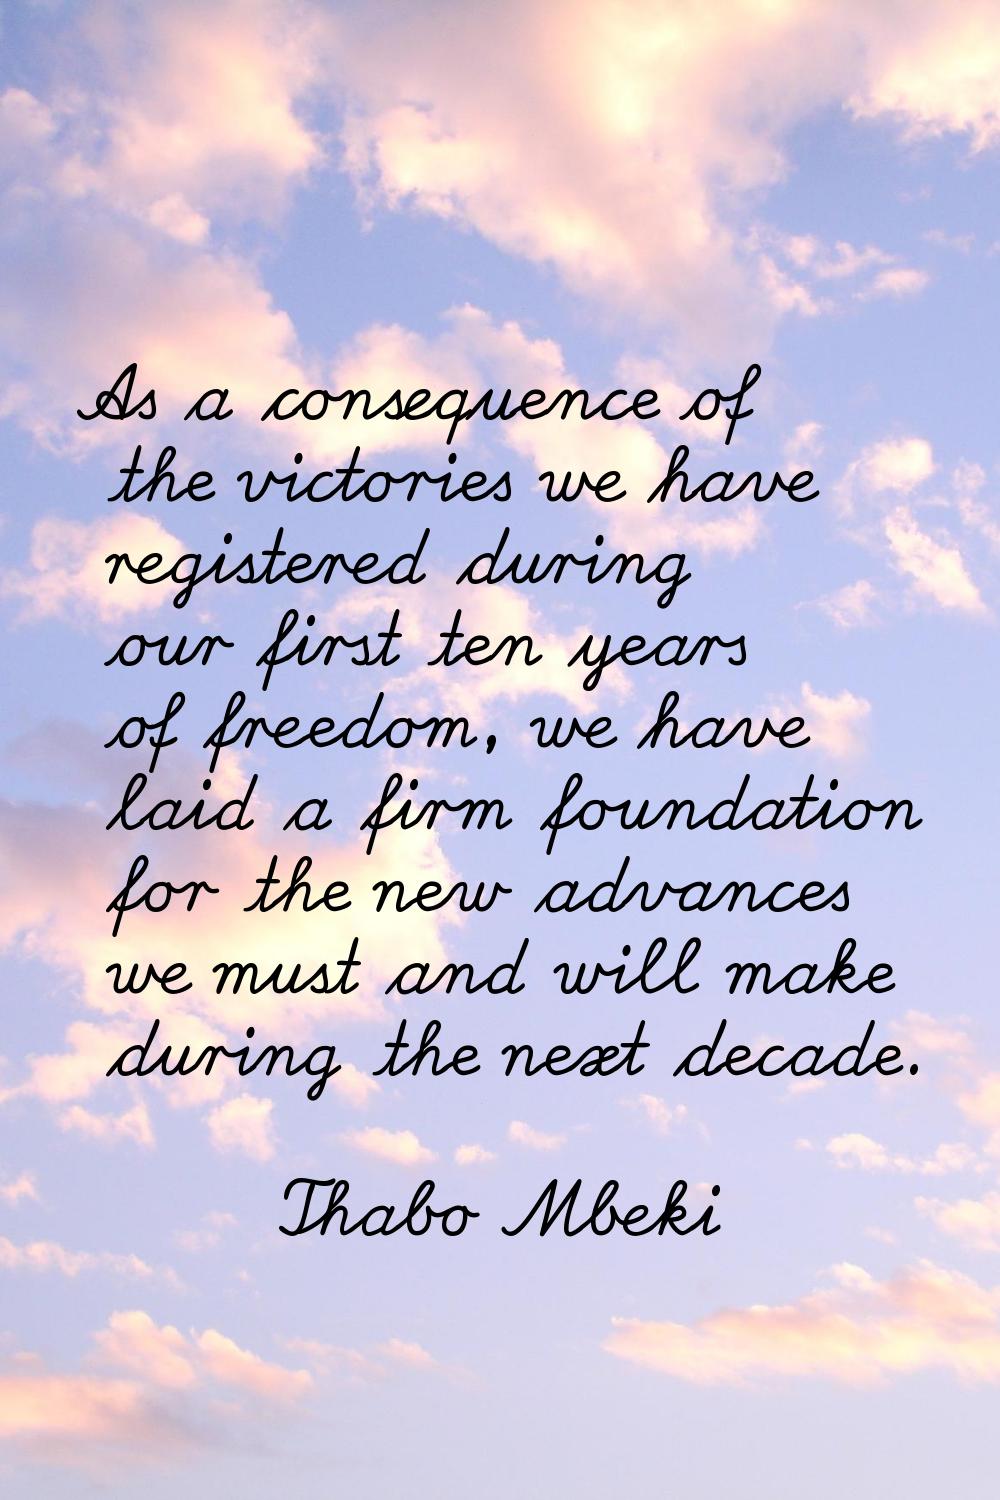 As a consequence of the victories we have registered during our first ten years of freedom, we have